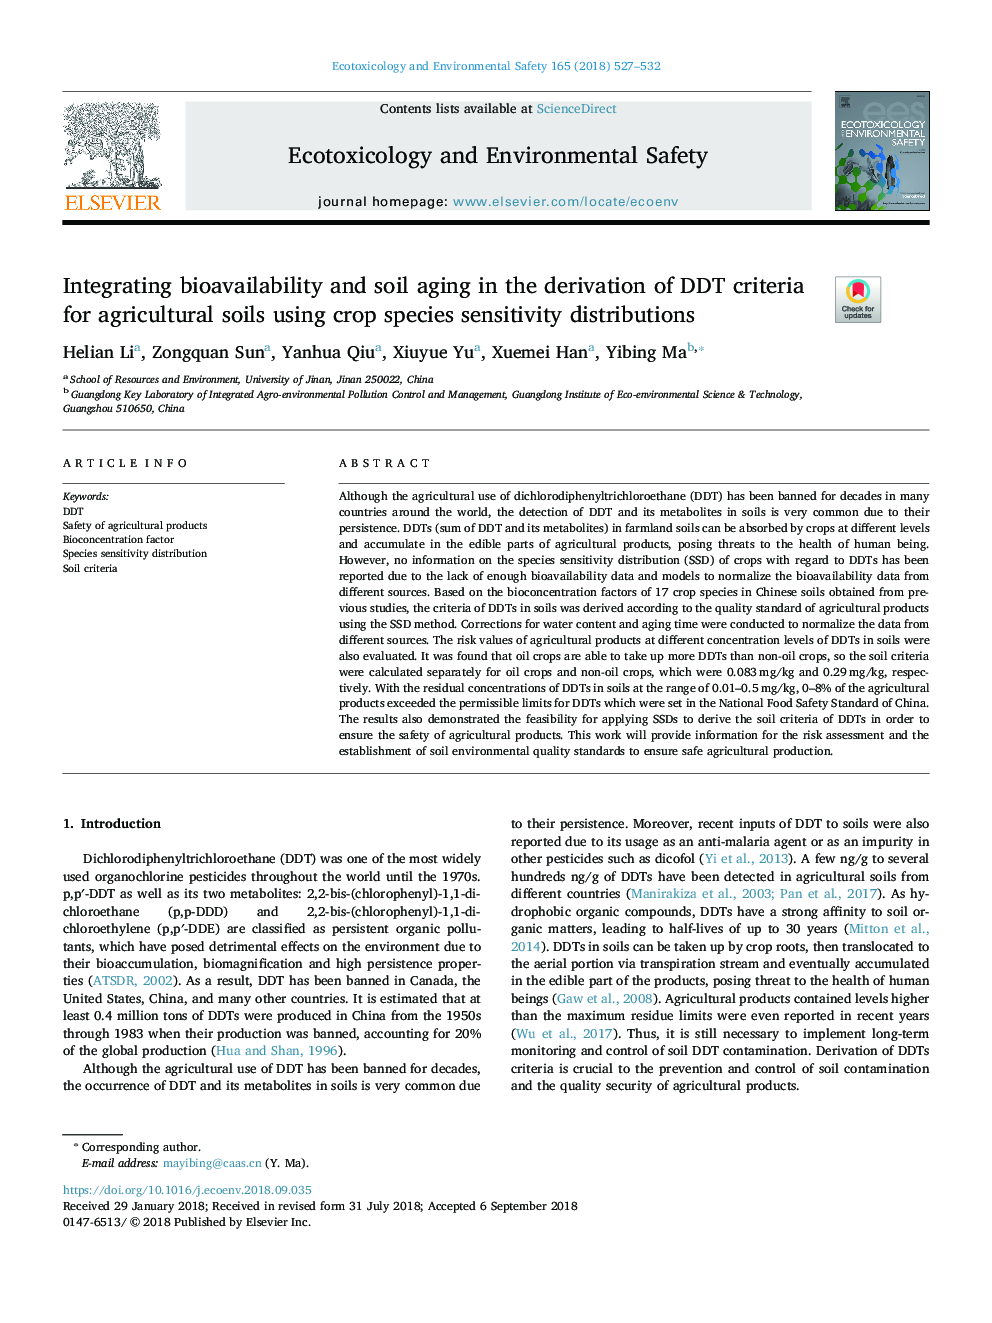 Integrating bioavailability and soil aging in the derivation of DDT criteria for agricultural soils using crop species sensitivity distributions